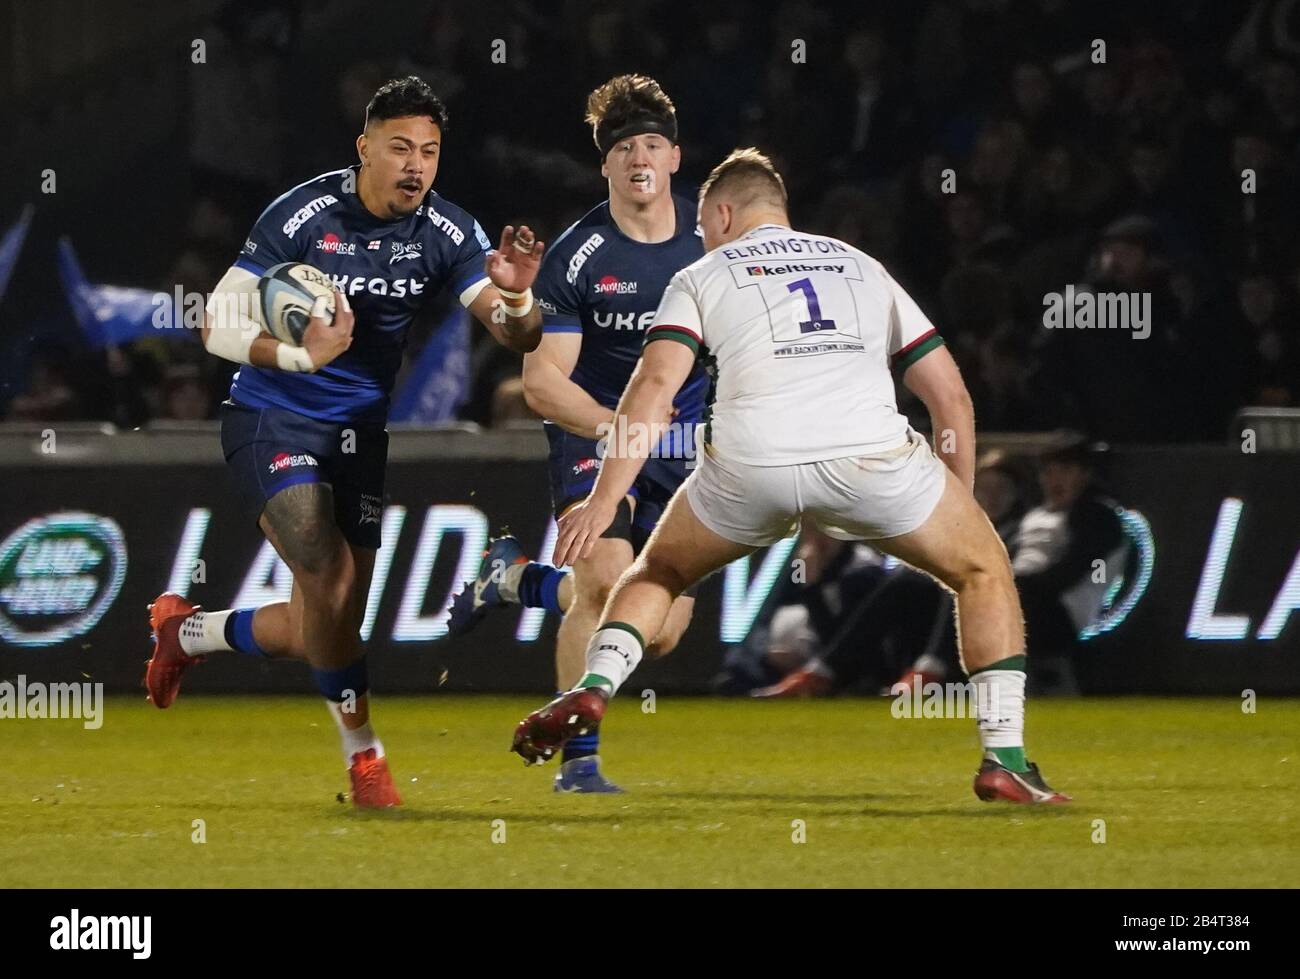 Sale Sharks wing Denny Solomona runs at London Irish prop Harry Elrington during a Gallagher Premiership Rugby Union match, won by Sharks 39-0, Friday, Mar. 6, 2020, in Eccles, United Kingdom. (Photo by IOS/ESPA-Images) Stock Photo